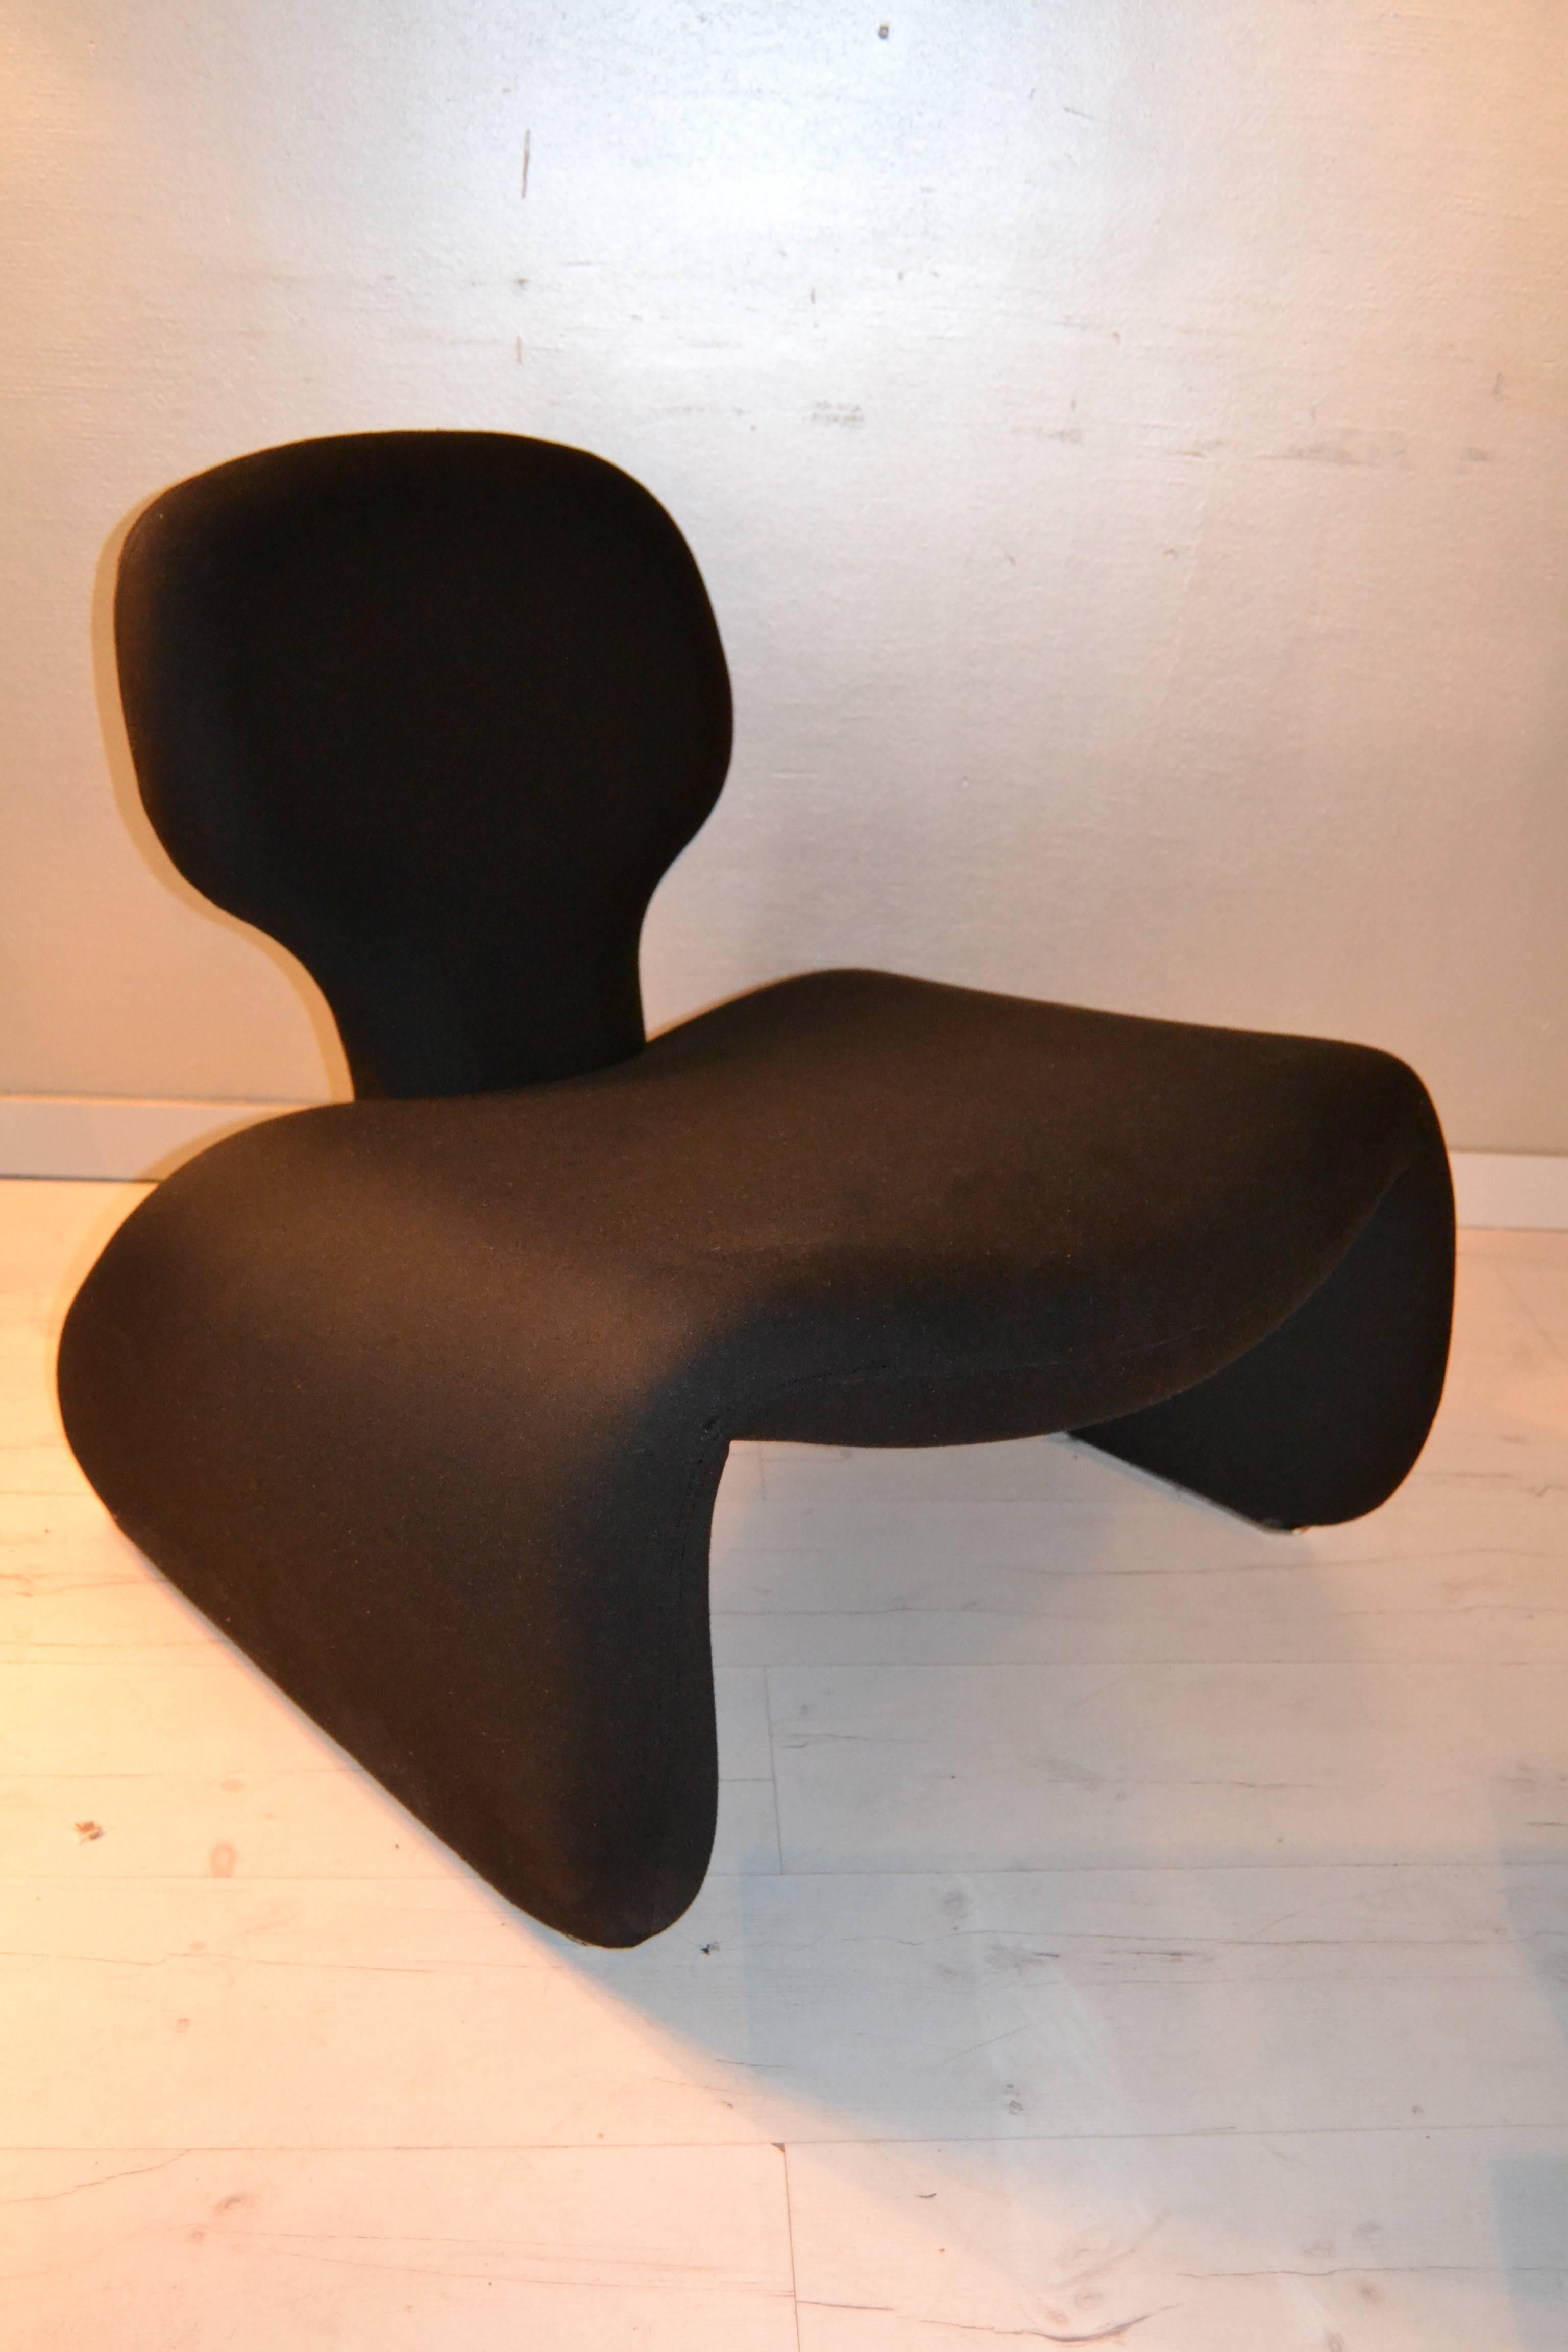 Pair of 1965 Djinn chairs by Olivier Morgue on black Jersey cotton. New uphostered as original.
Great condition.
Airborne International, France, 1965. Wool upholstery over foam and internal steel frame. 
Very popular because was featured in